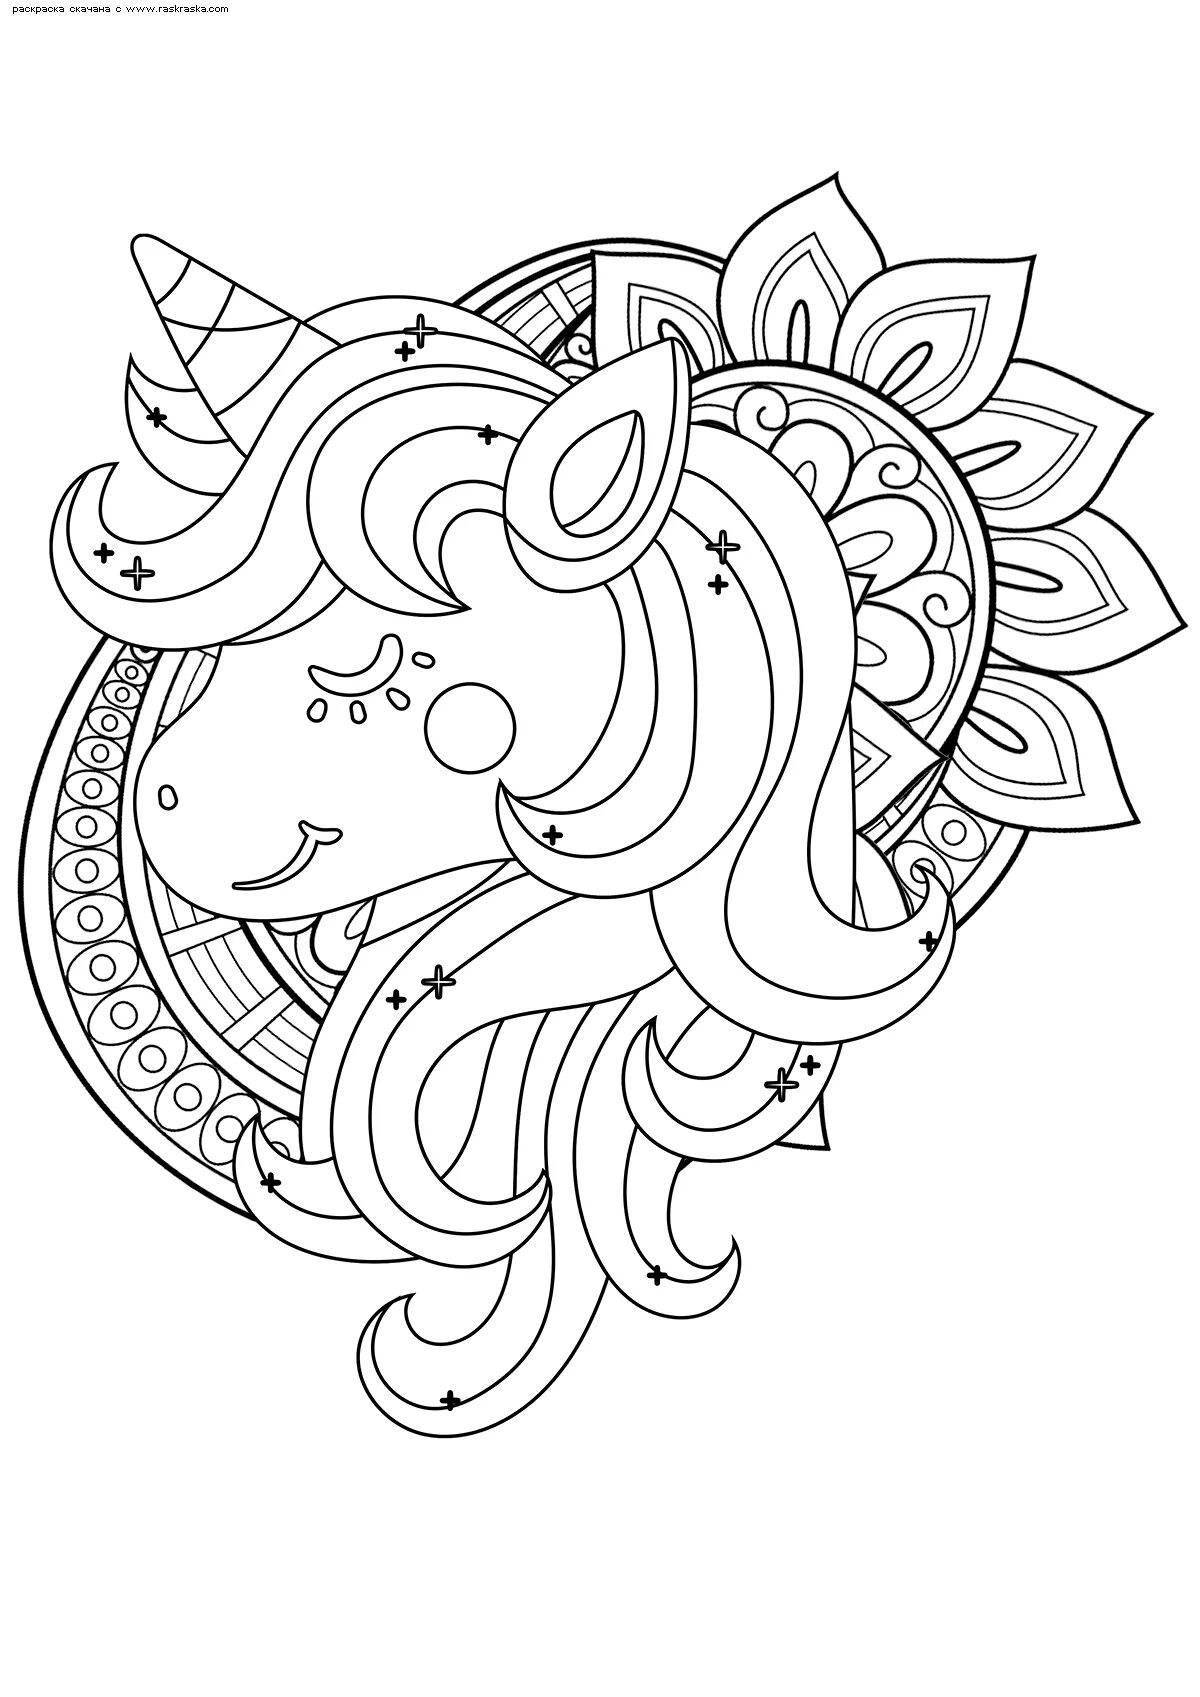 Exciting anti-stress lung coloring book for girls